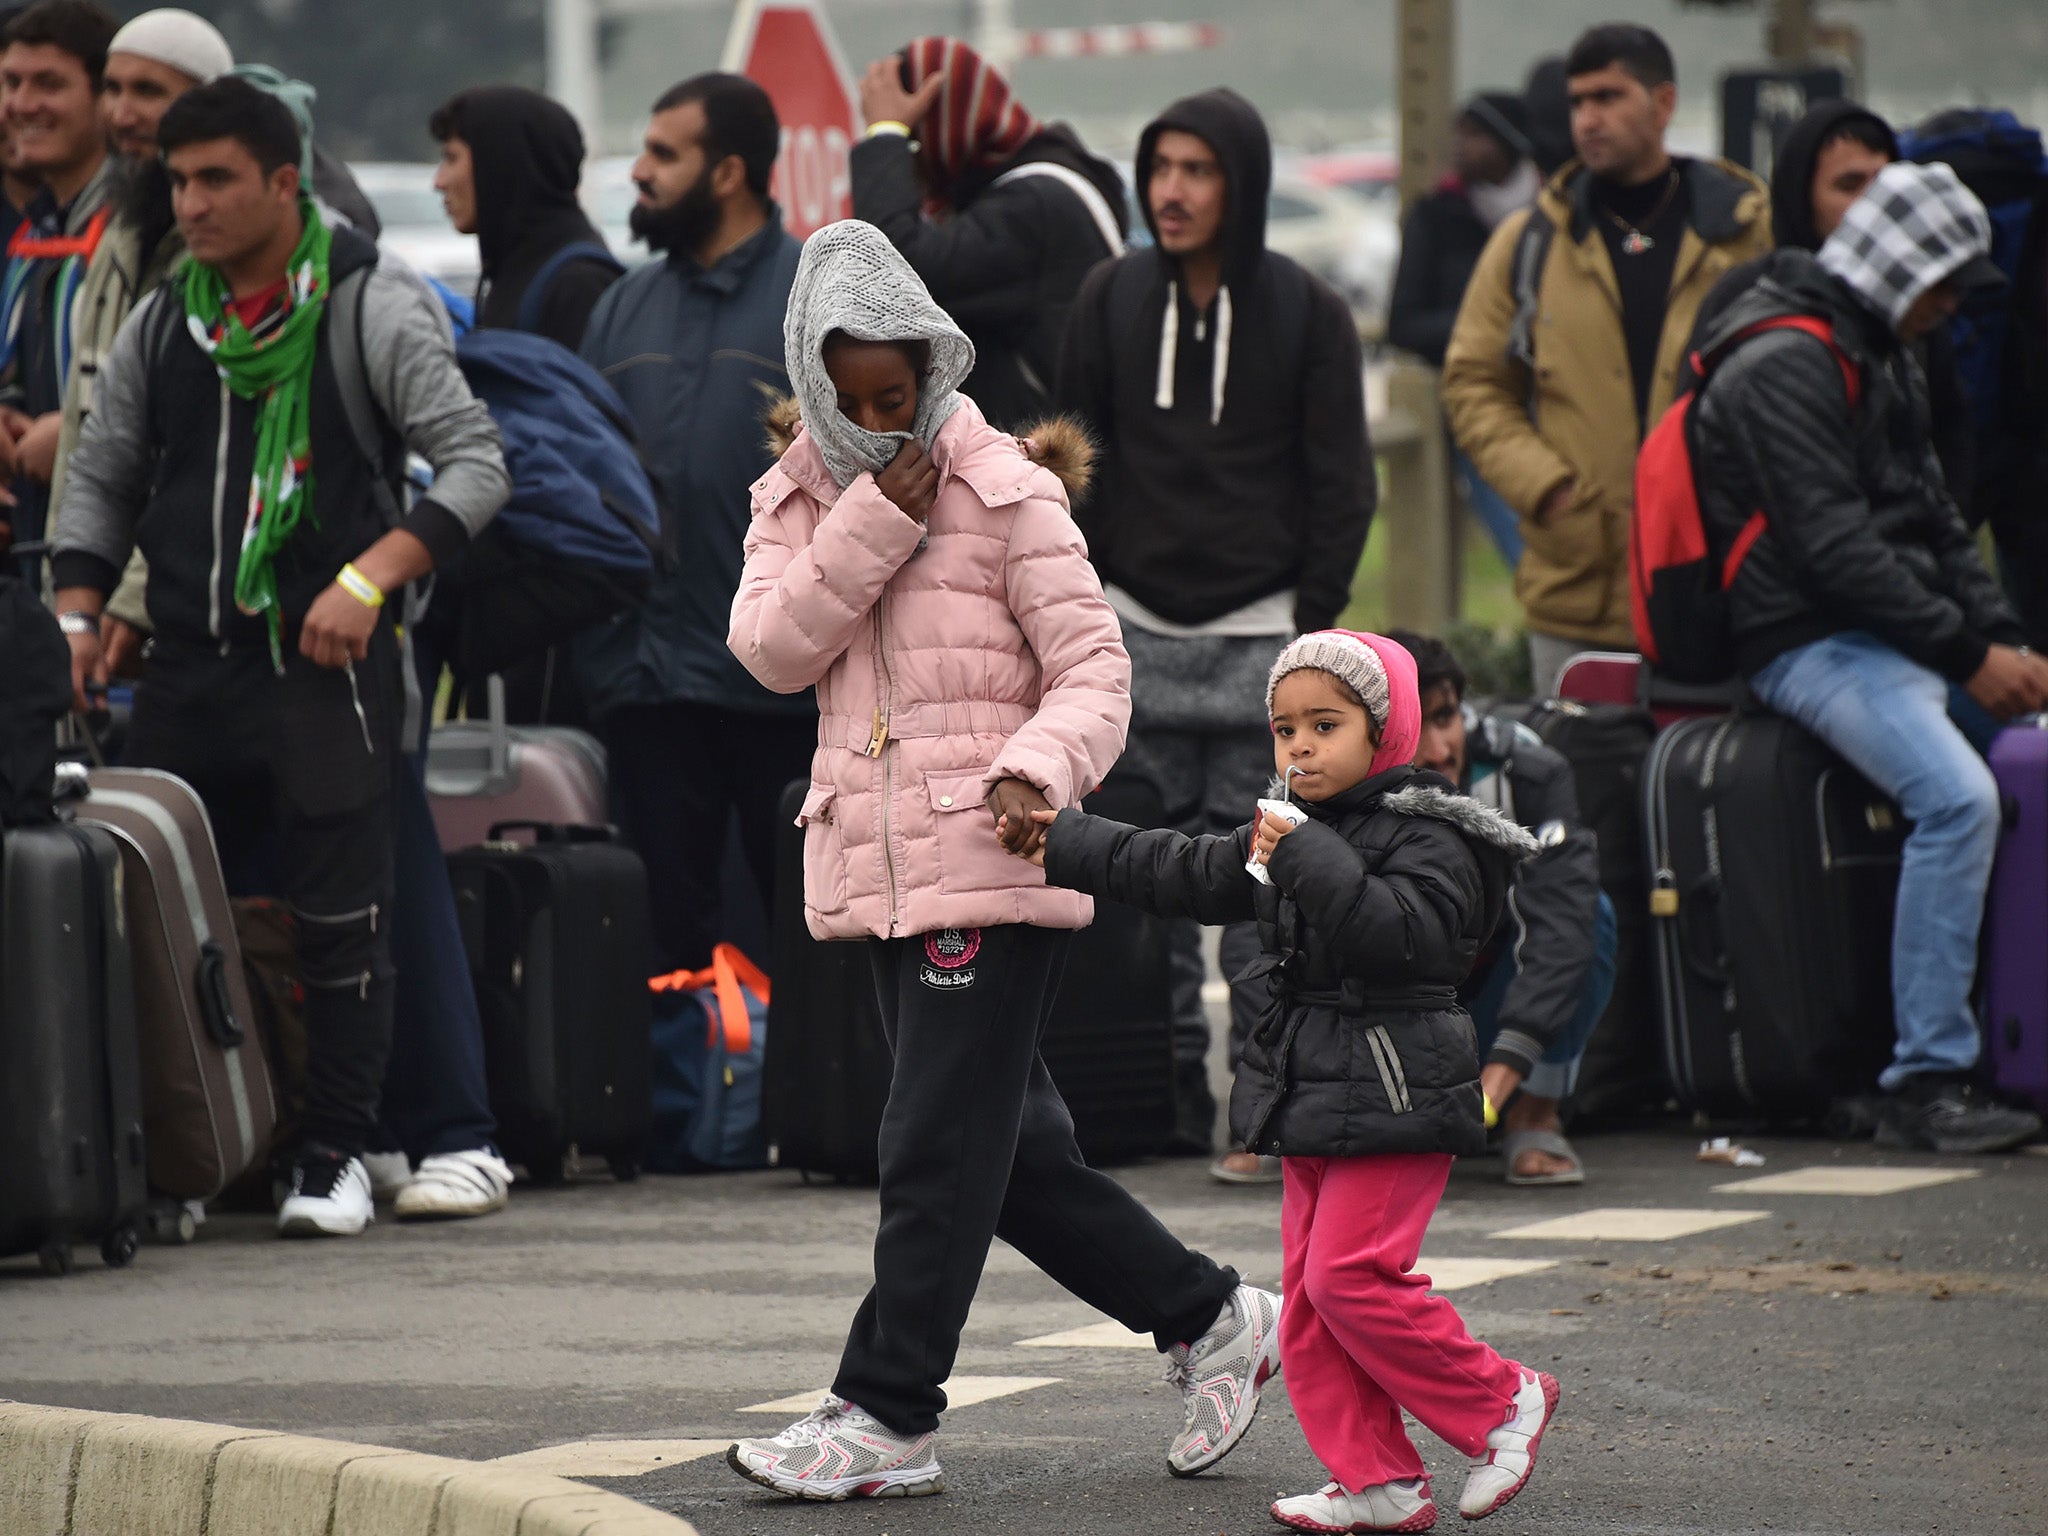 Up to 400 unaccompanied minors are reportedly arriving in Calais each week